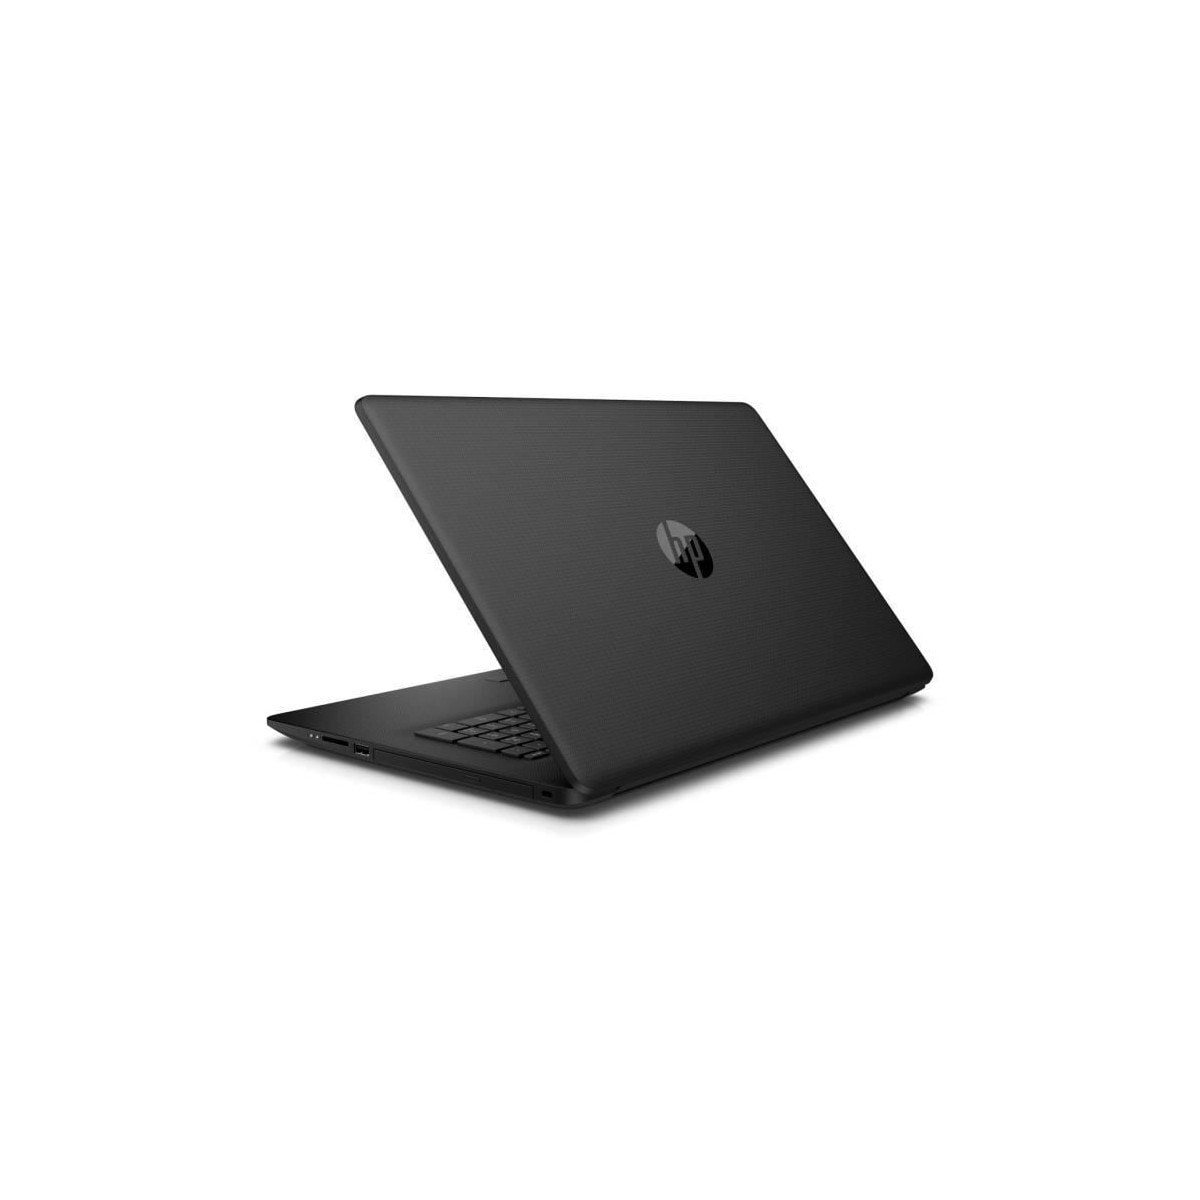 HP PC Portable 17-ca0004nf - 17,3HD - AMD A9 - RAM 8Go - Stockage 1To HDD  - AZERTY - Windows 10 - Cdiscount Informatique